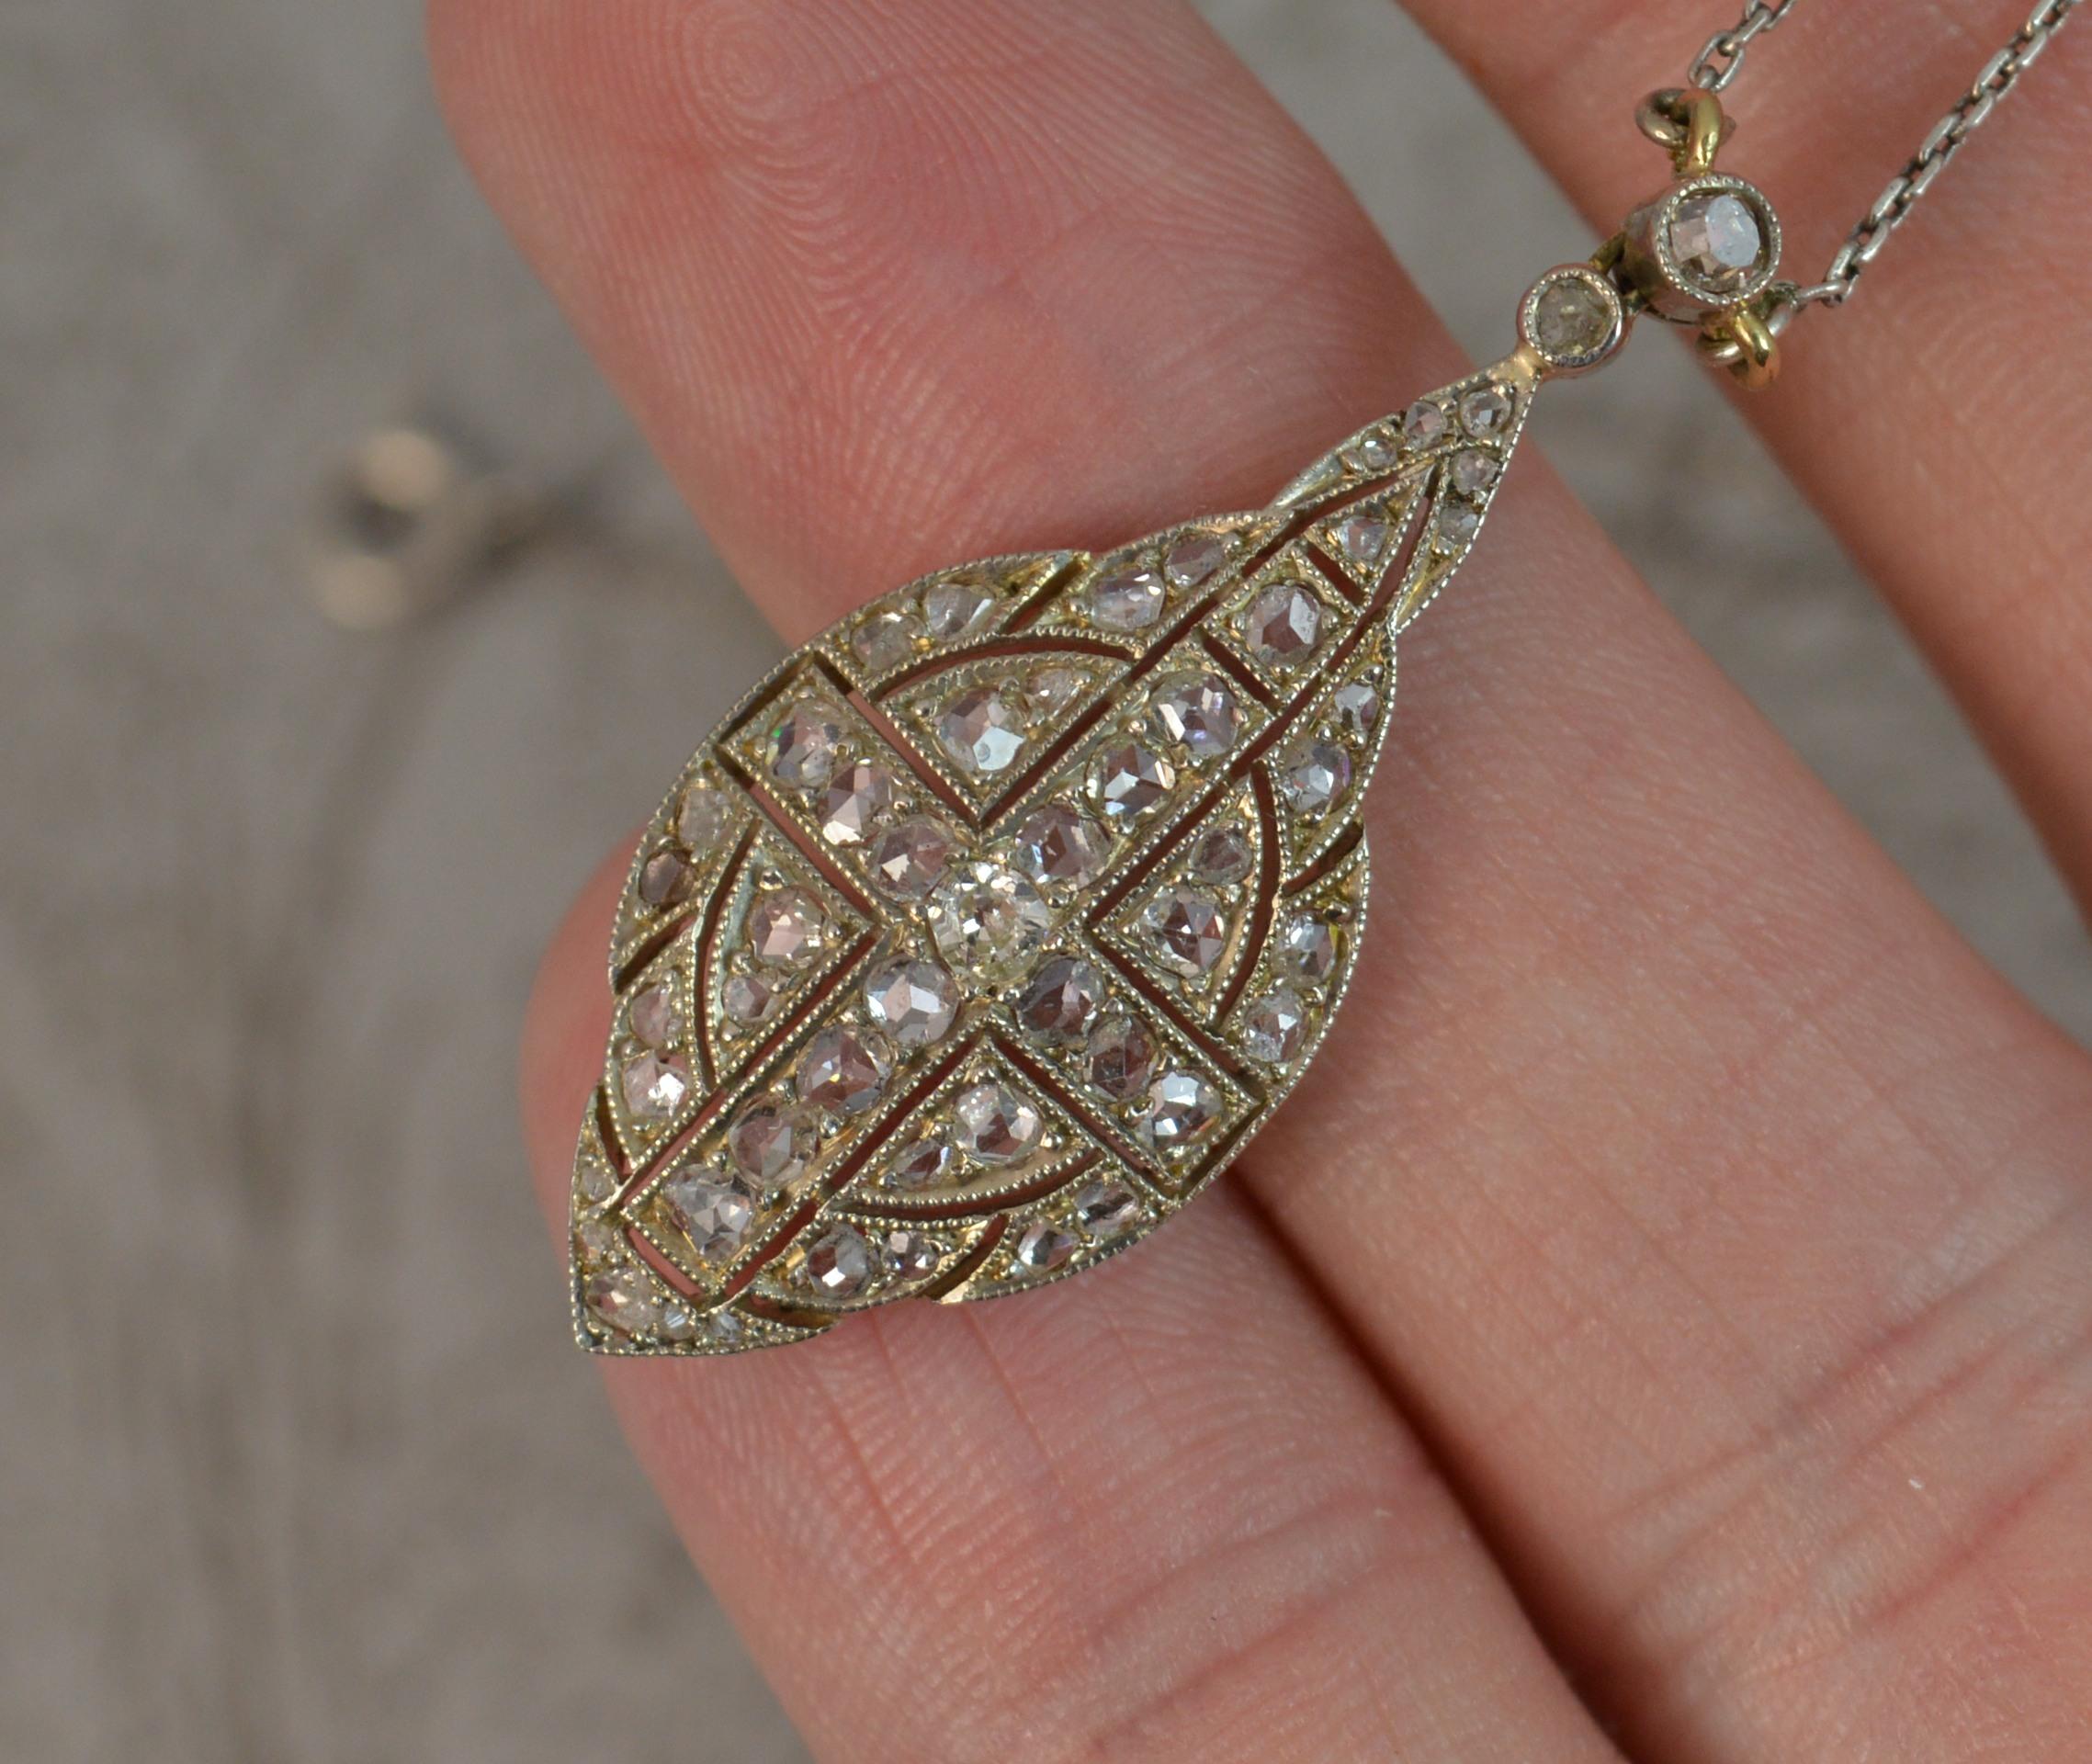 
A fantastic true antique pendant necklace.

Stylishly shaped pendant drop encrusted with a number of rose cut diamonds in grain settings. 

41 natural, original, rose cut diamonds.

Complete with fine link chain.

CONDITION ; Excellent. Crisp